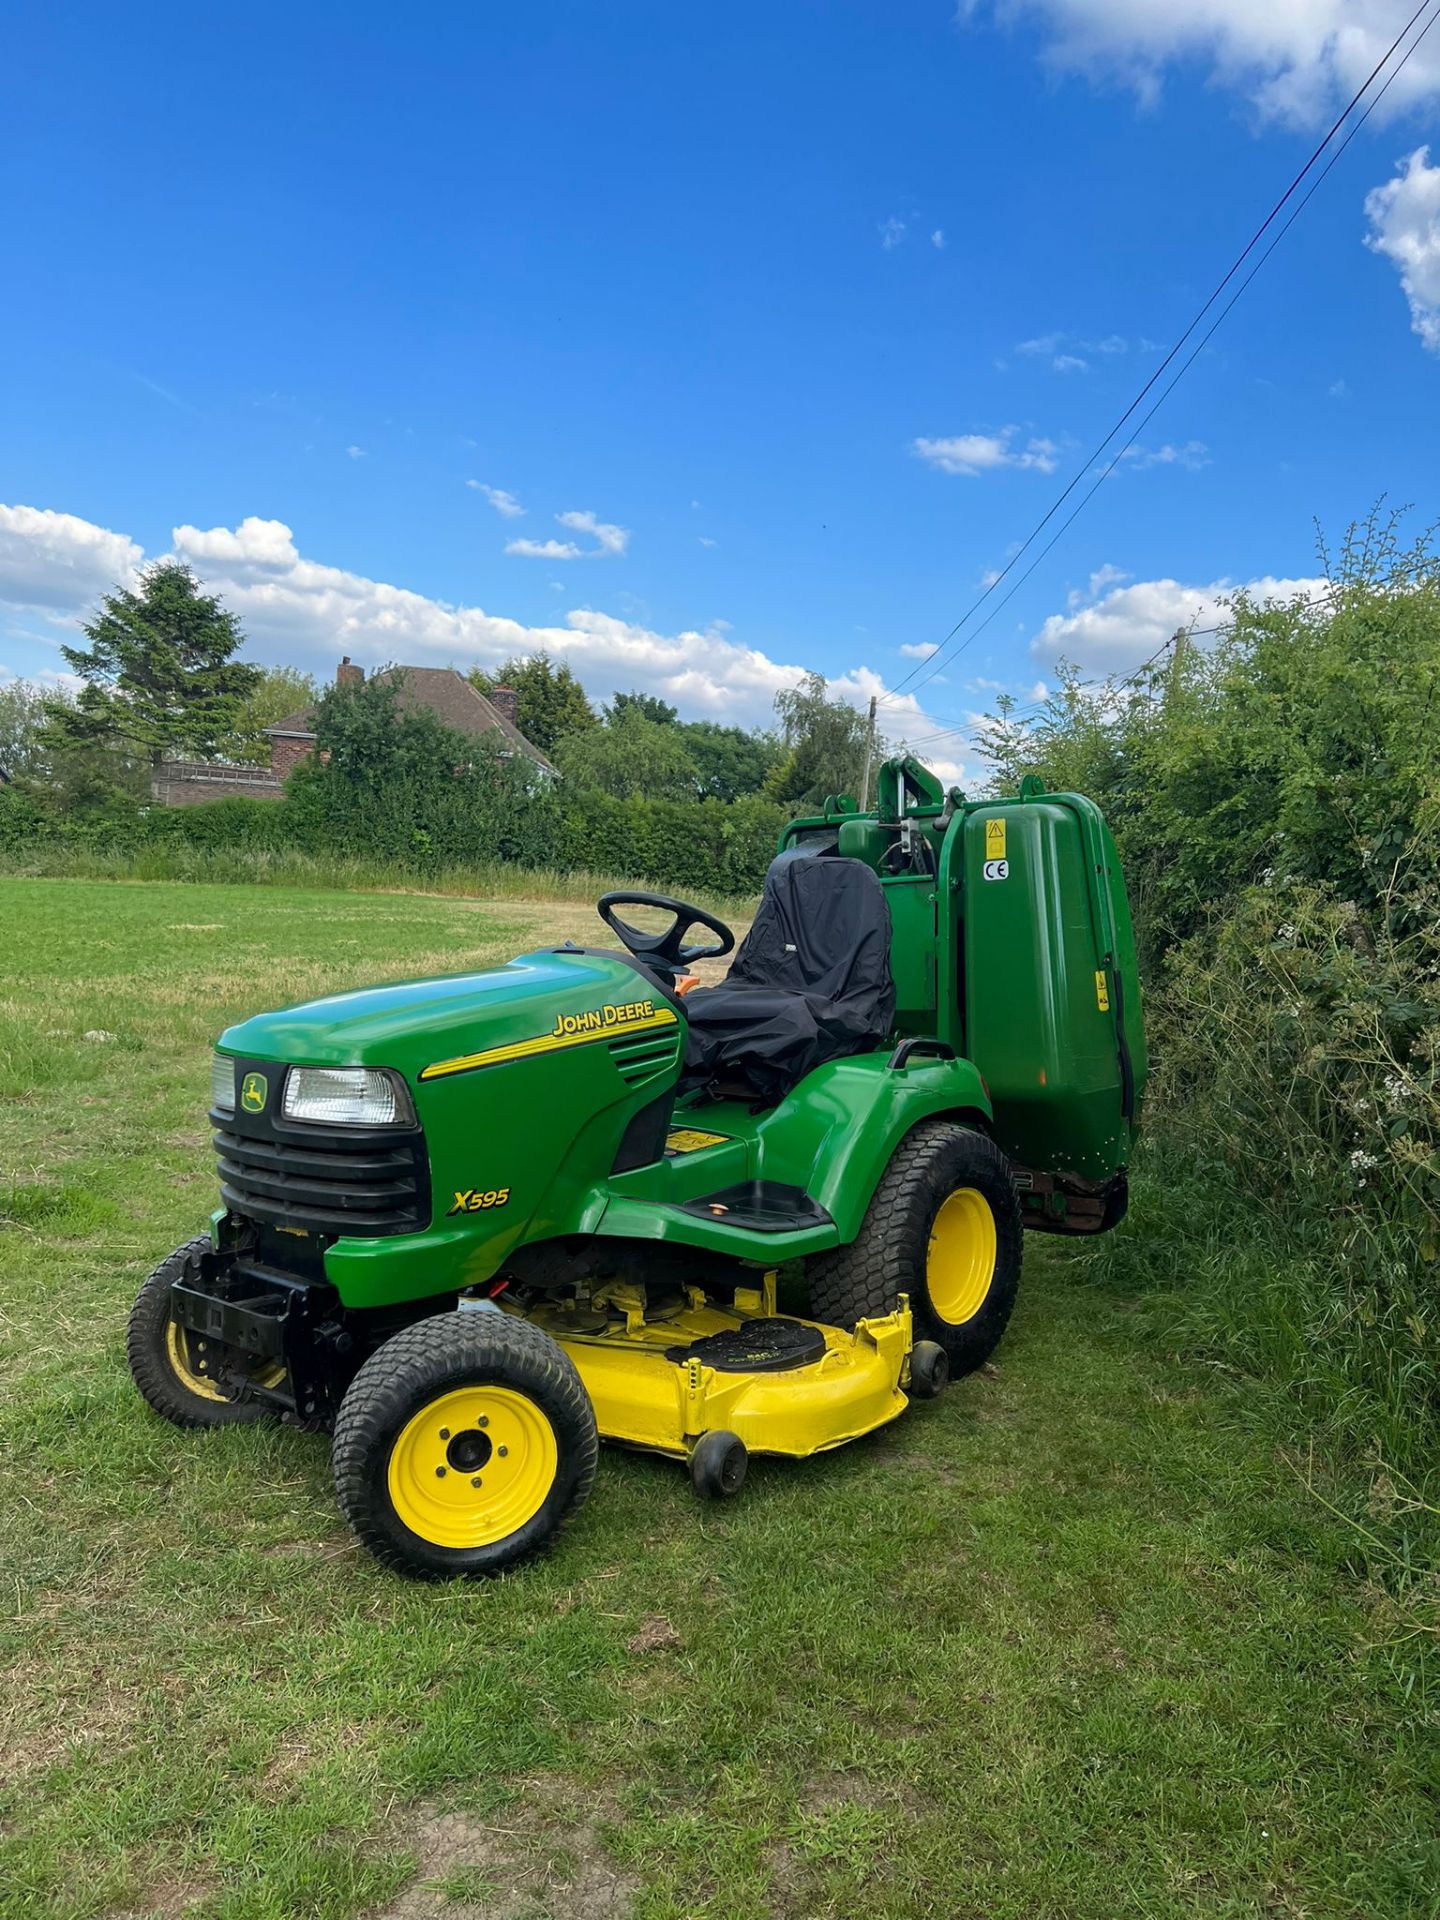 JOHN DEERE X595 4x4 RIDE ON LAWN MOWER WITH COLLECTOR *PLUS VAT*